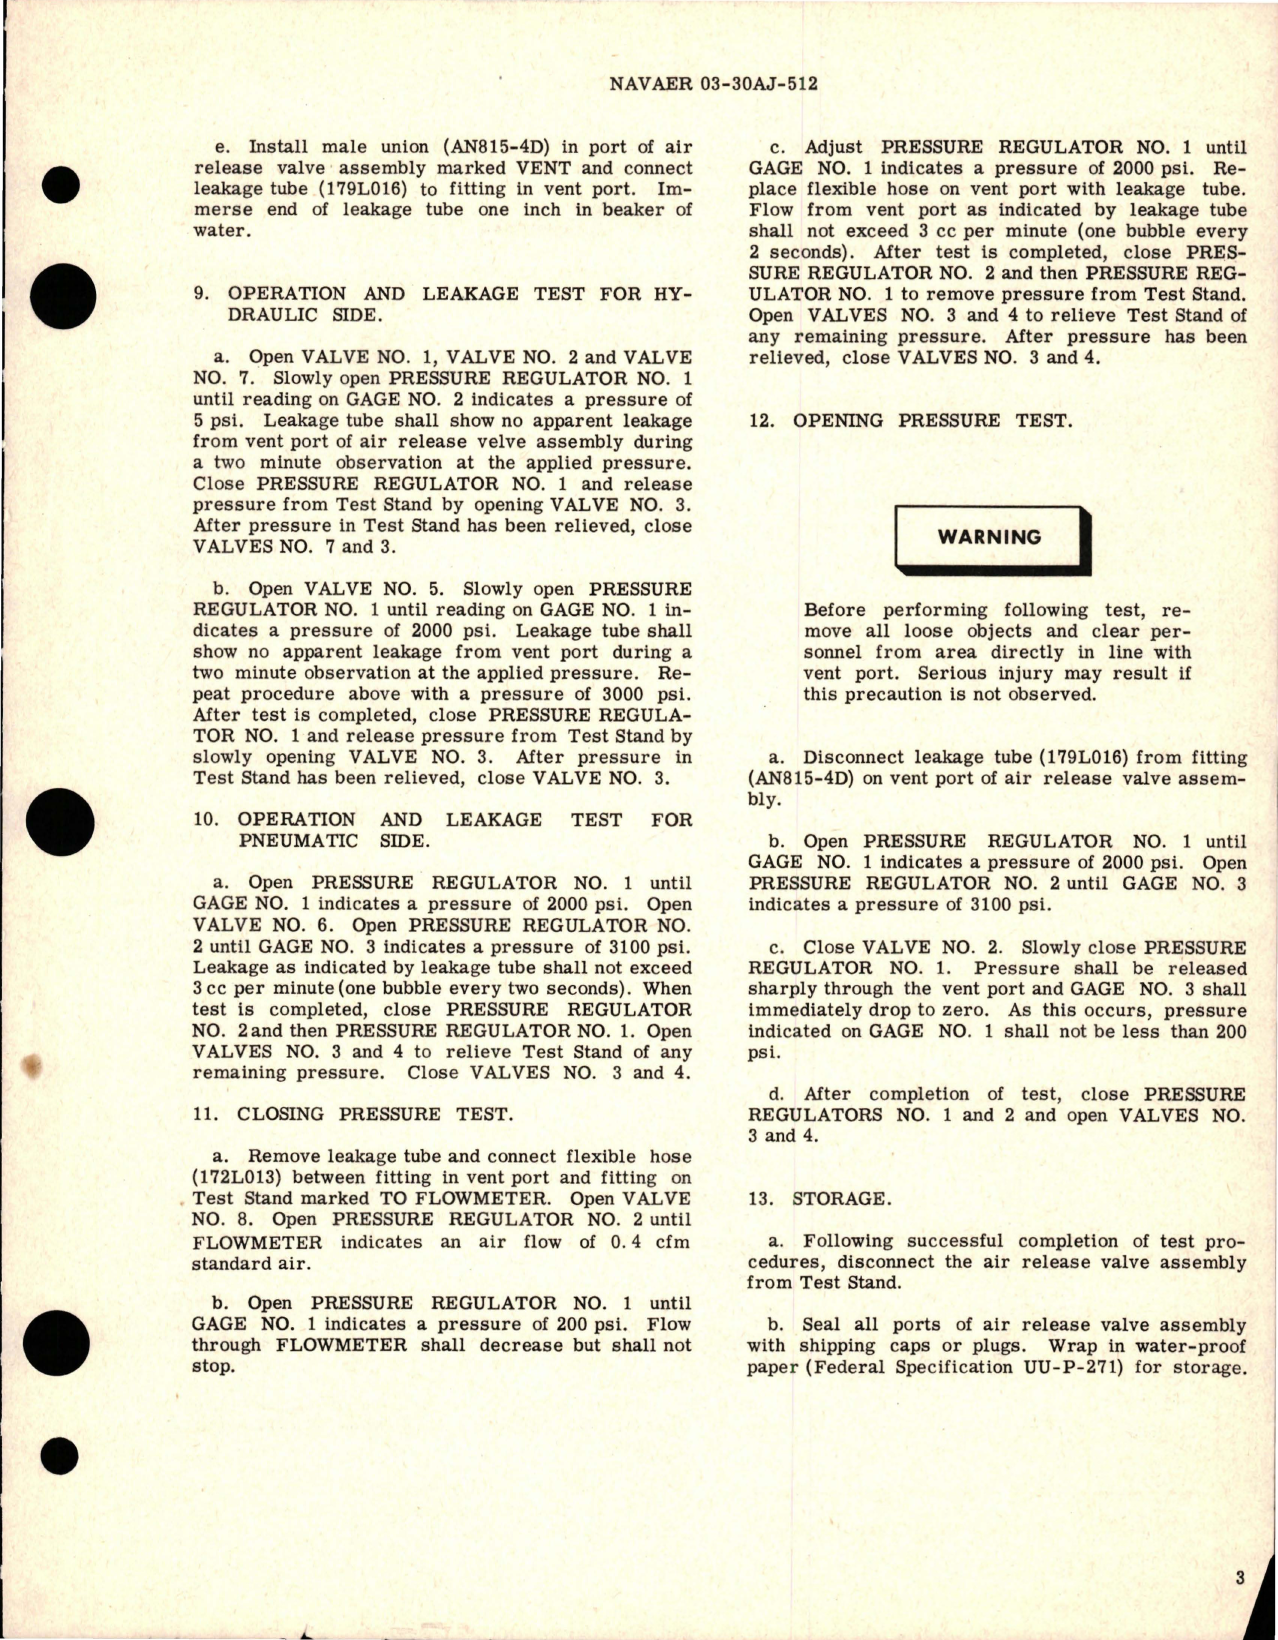 Sample page 5 from AirCorps Library document: Overhaul Instructions with Parts Breakdown for Air Release Valve Assembly - Model 130B1025